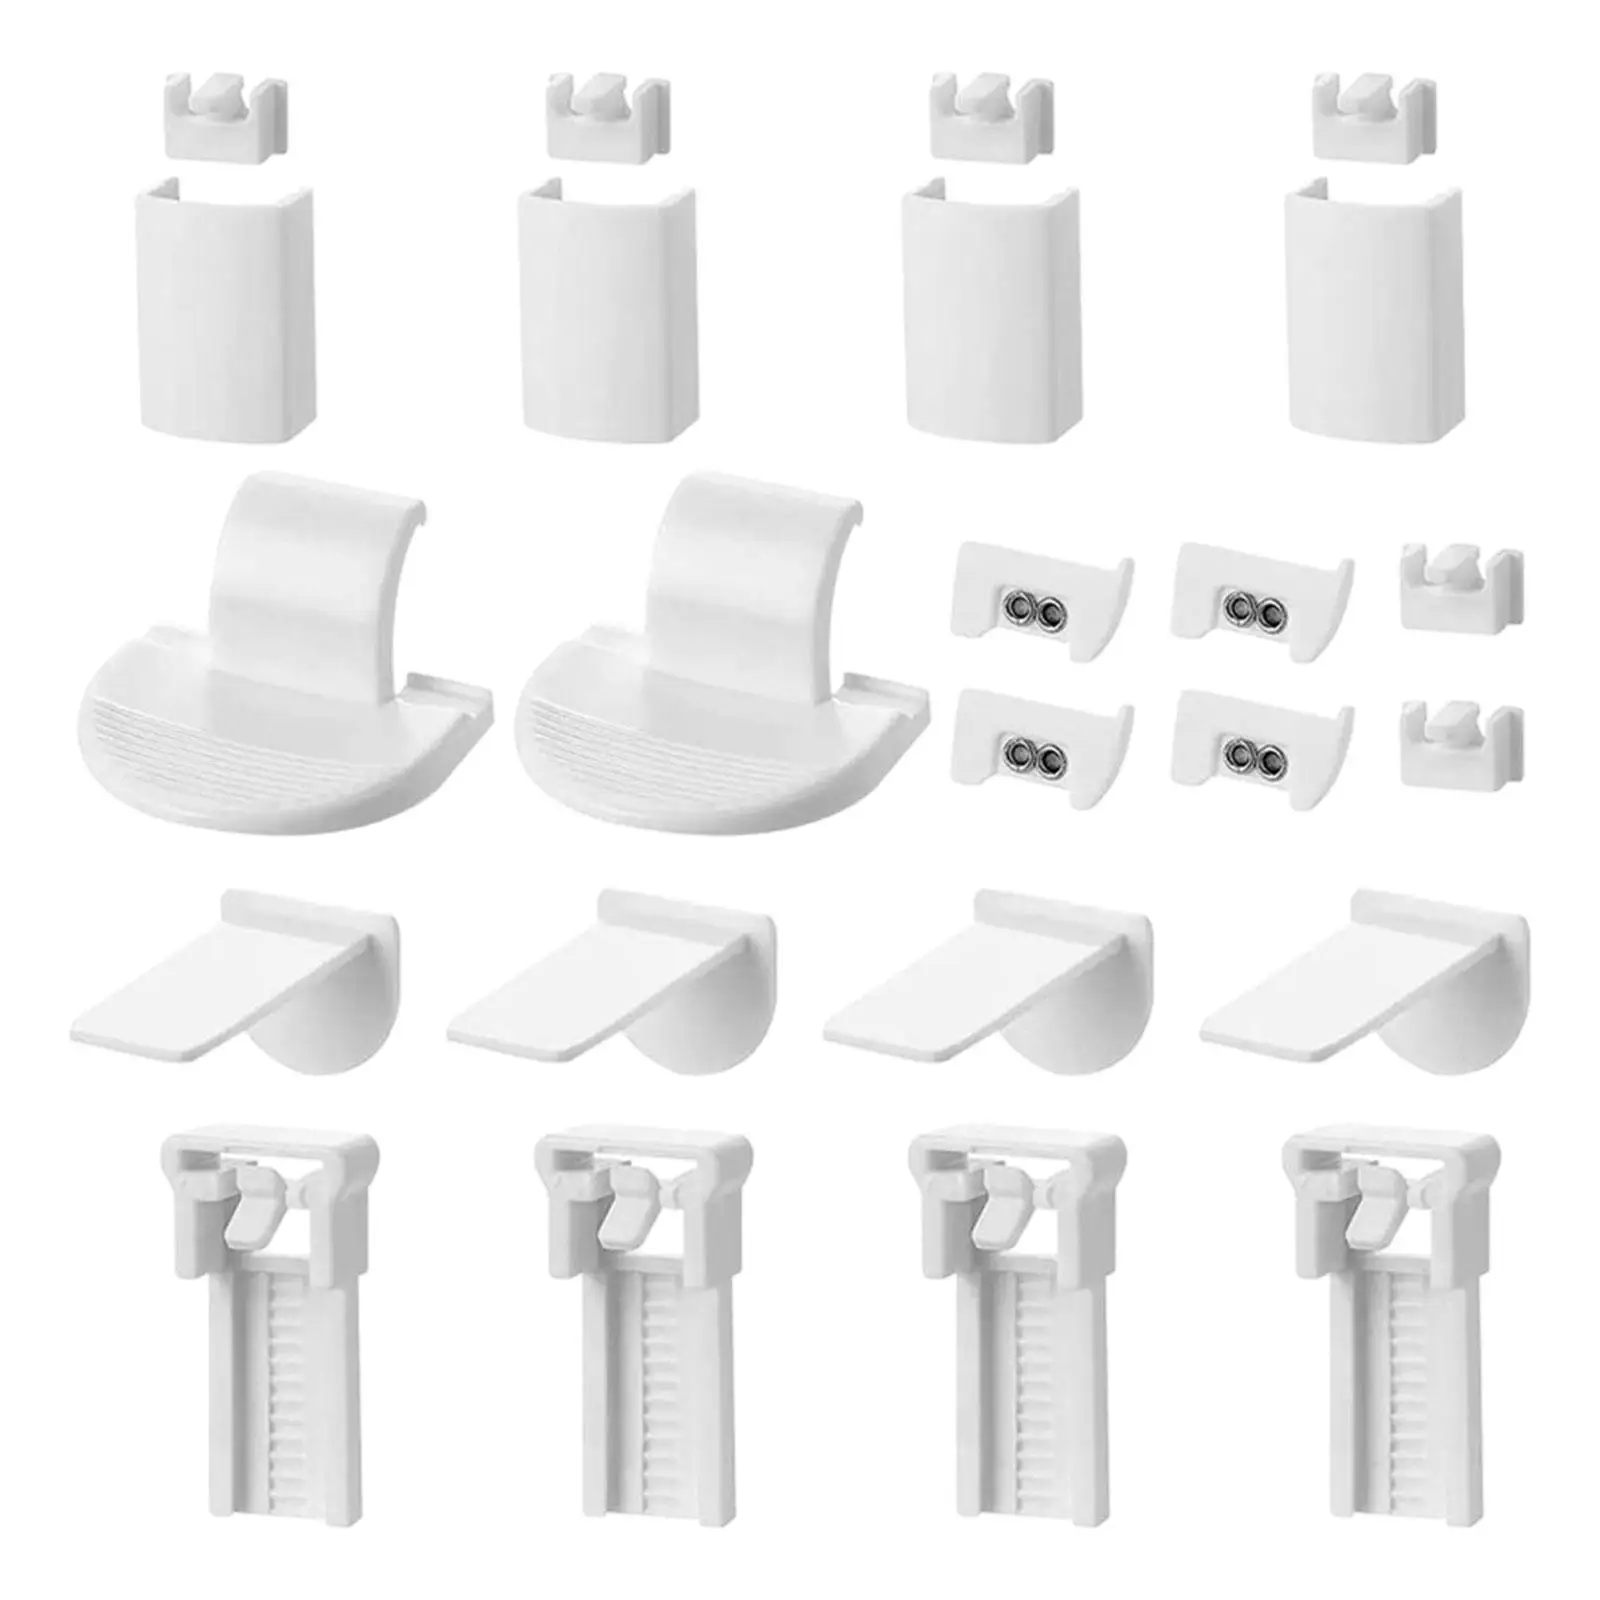 Pleated Clamp Support Set Easy to Install for Farmhouse Bathroom Study Room